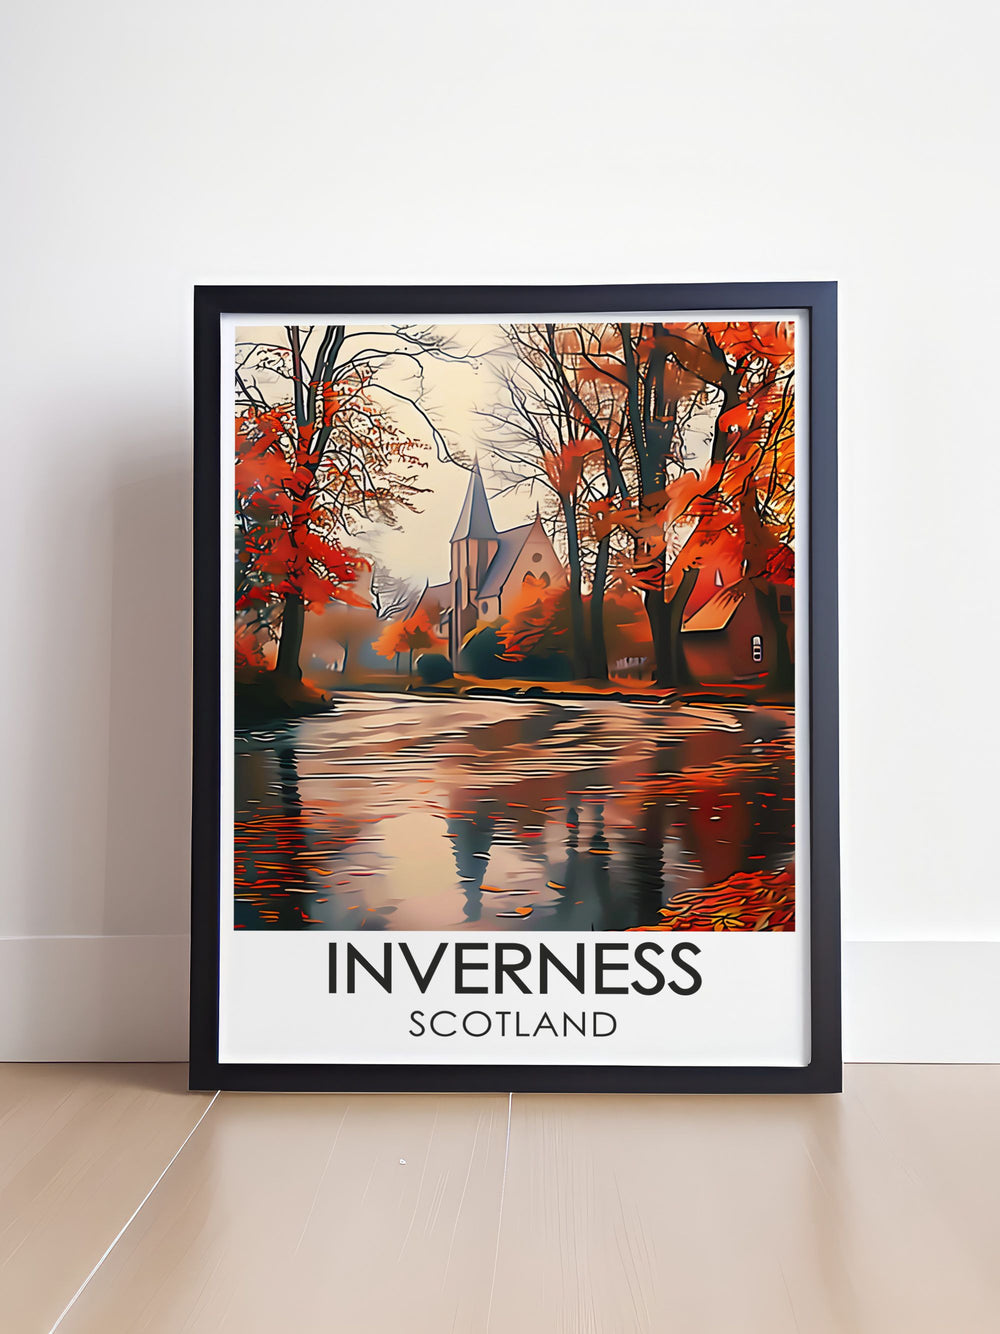 Fine art print capturing the serene Ness Islands, known for their lush greenery and charming Victorian bridges, providing a peaceful escape in the heart of Inverness.